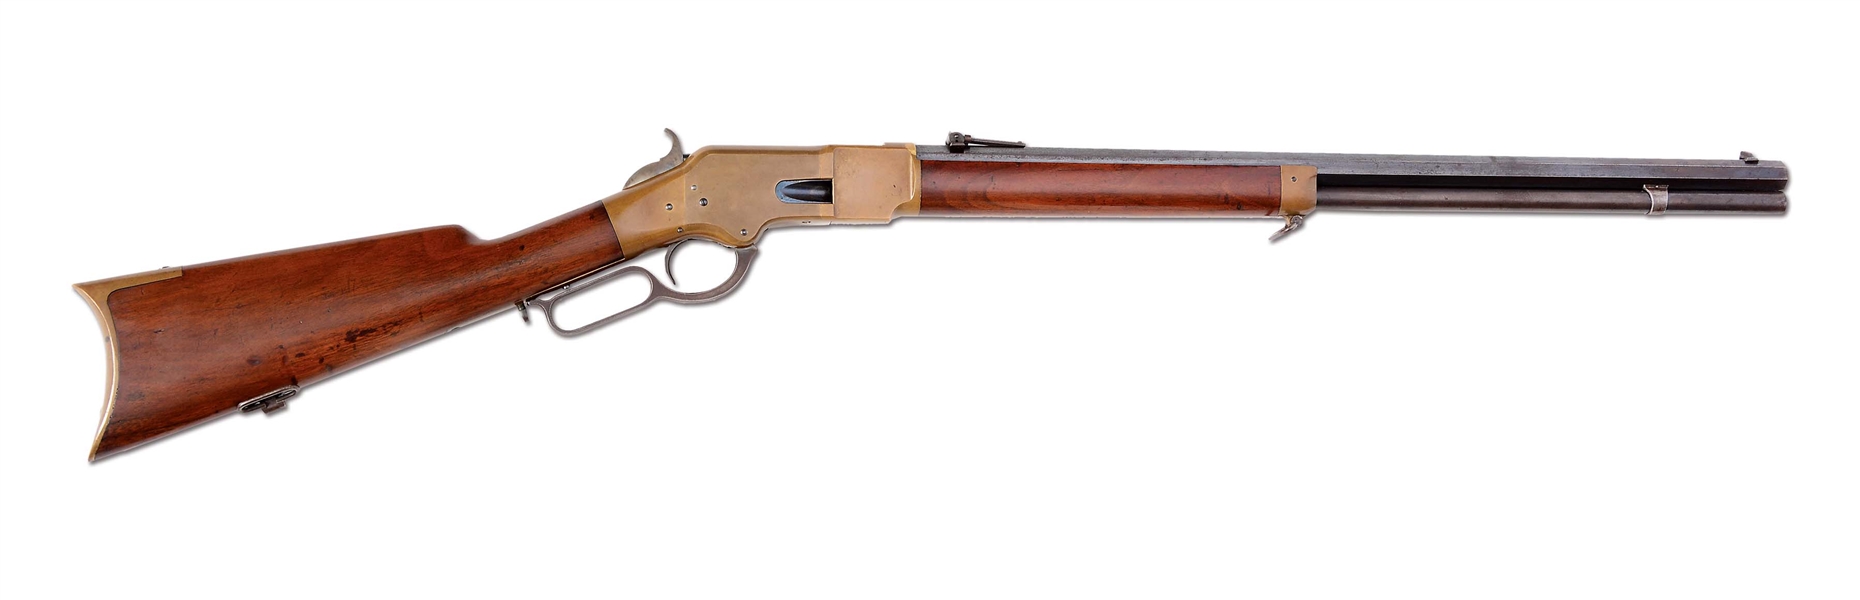 (A) FINE EARLY 1866 WINCHESTER LEVER ACTION RIFLE WITH EARLY HENRY MARKED BARREL & HENRY 900 STAFF REAR SIGHT (1868).